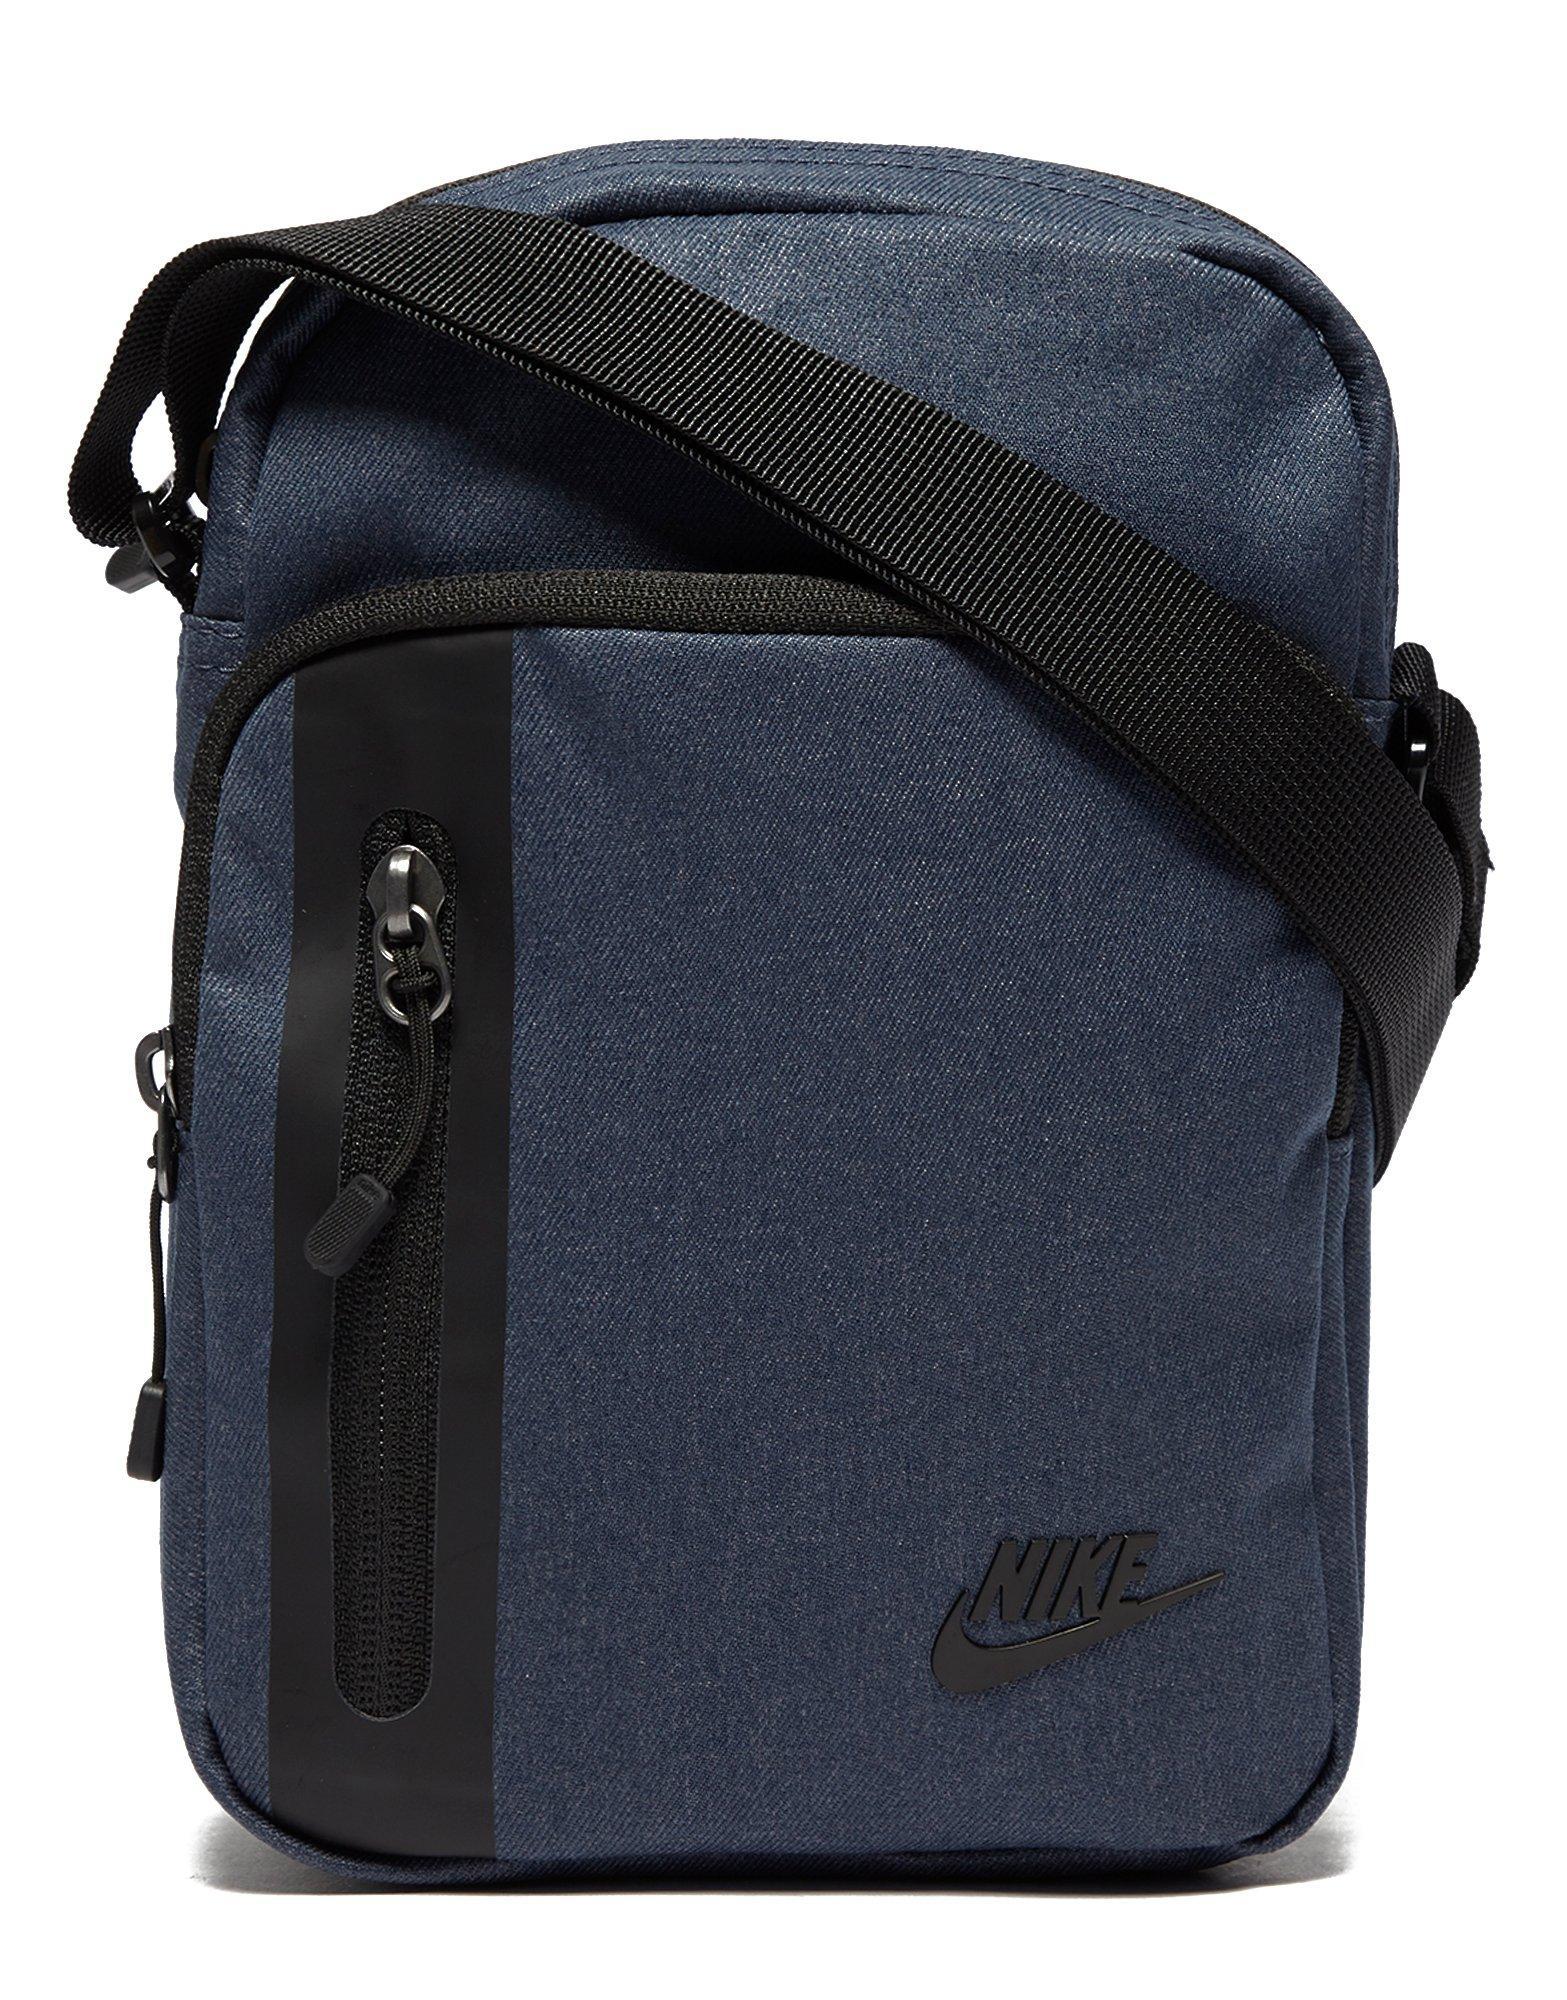 Nike Synthetic Core Small Crossbody Bag in Blue/Black (Blue) for Men - Lyst